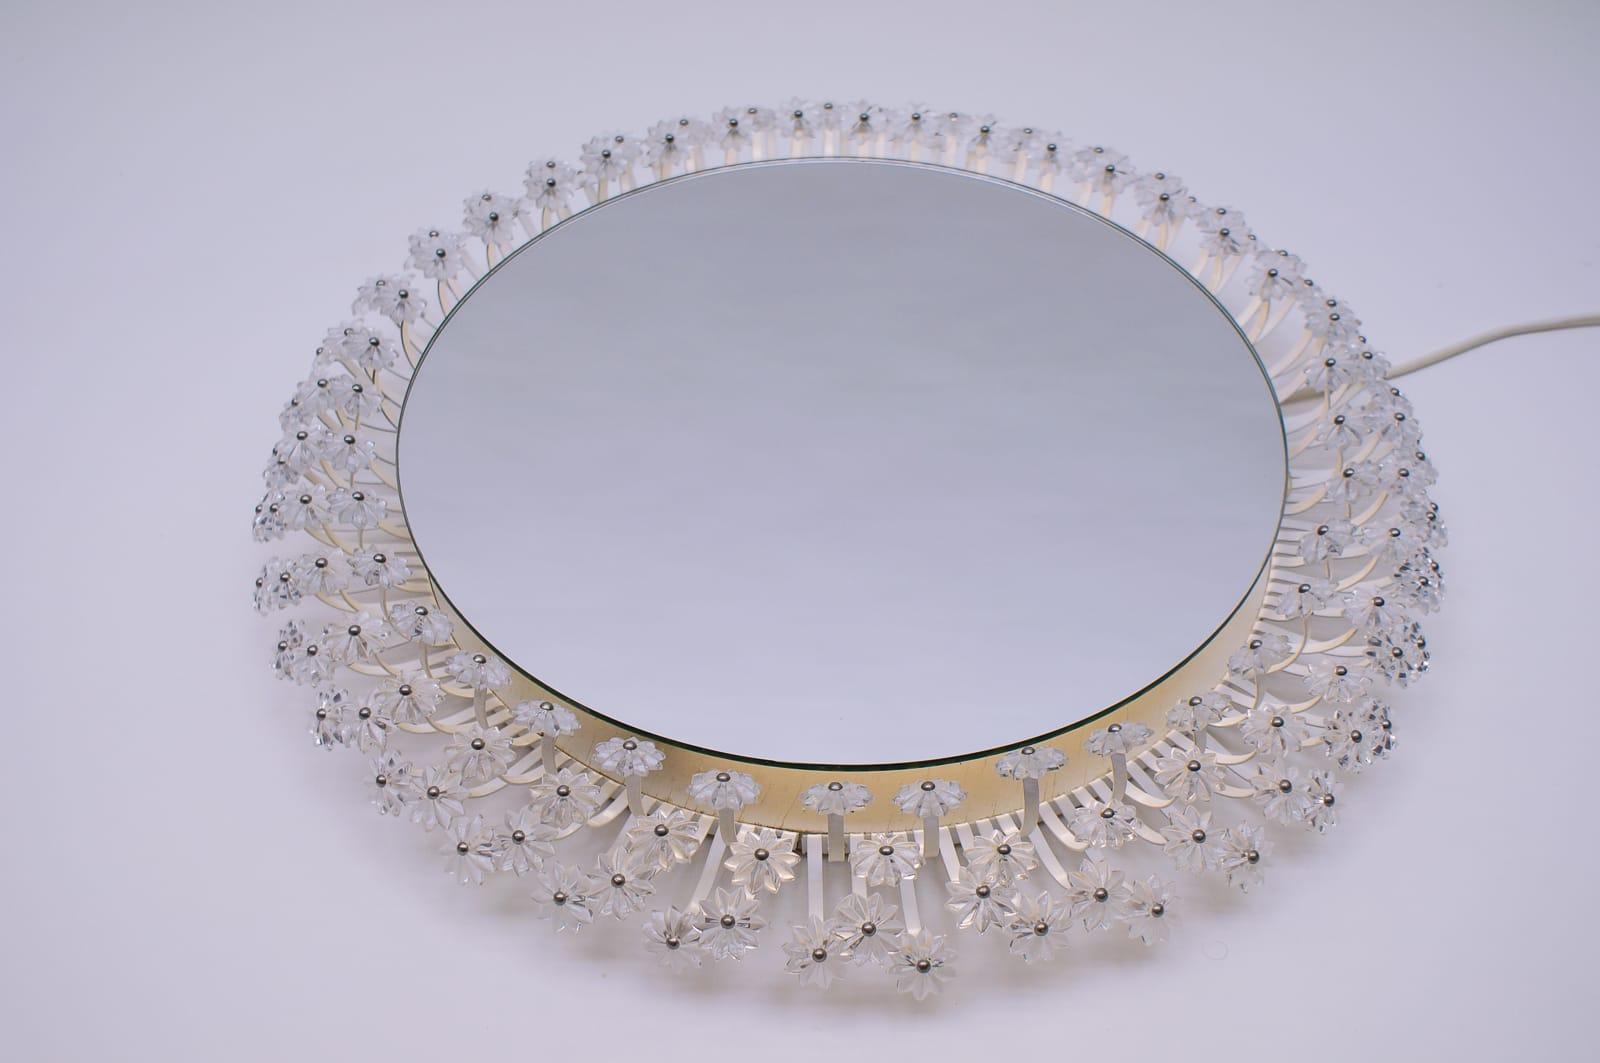 Space Age Large Round Illuminated Lucite Flower Mirror Emil Stejnar Rupert Nikoll, 1955 For Sale